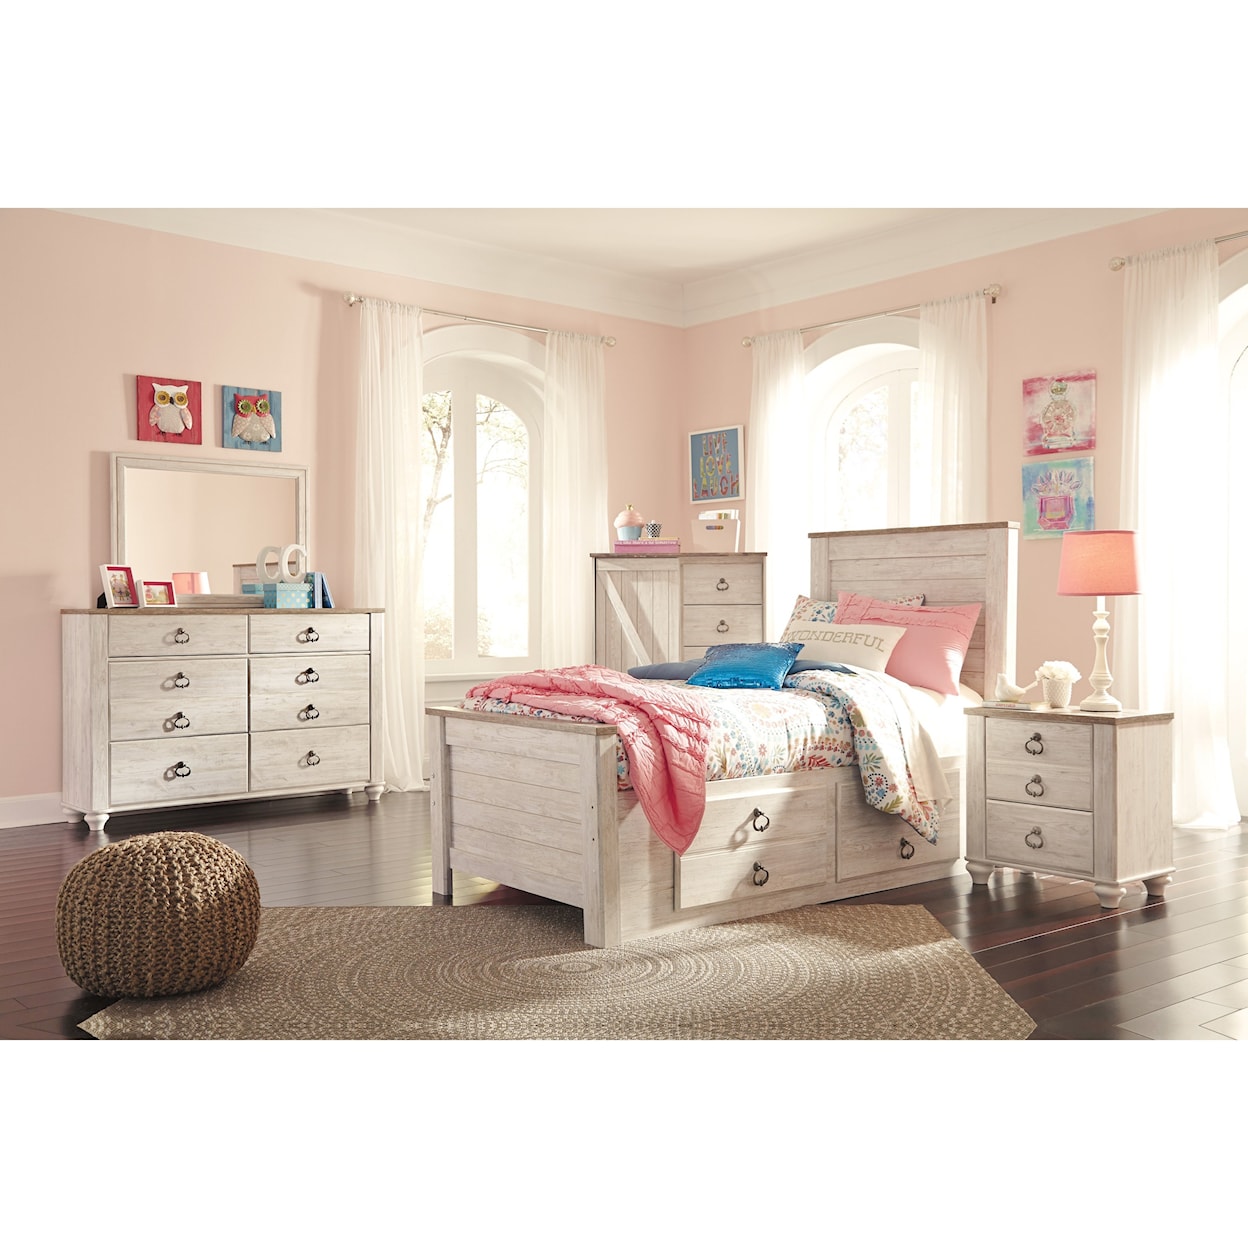 Michael Alan Select Willowton Twin Bed with Underbed Storage Drawers